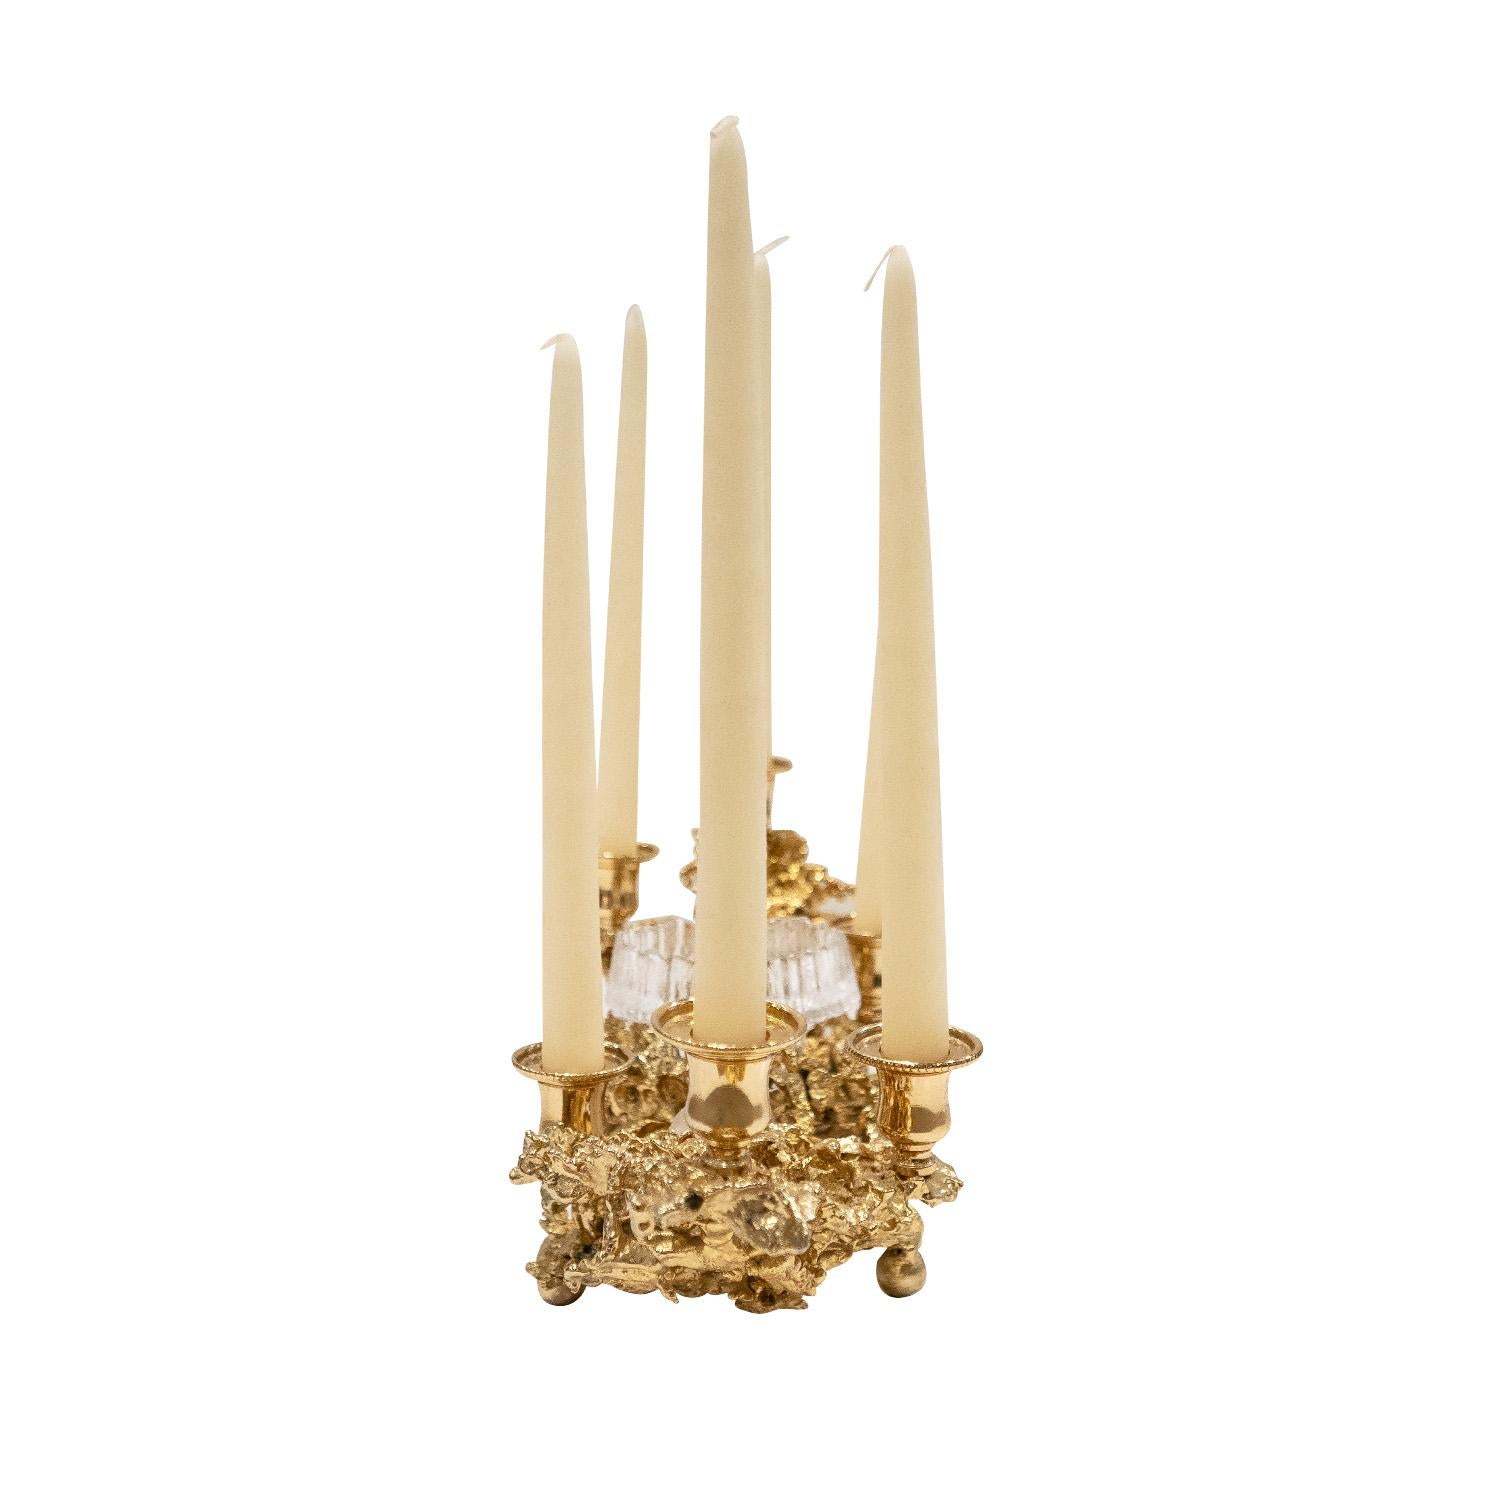 French Boeltz Candelabra Centerpiece in Gold with Rock Crystals 1970s 'Signed' For Sale